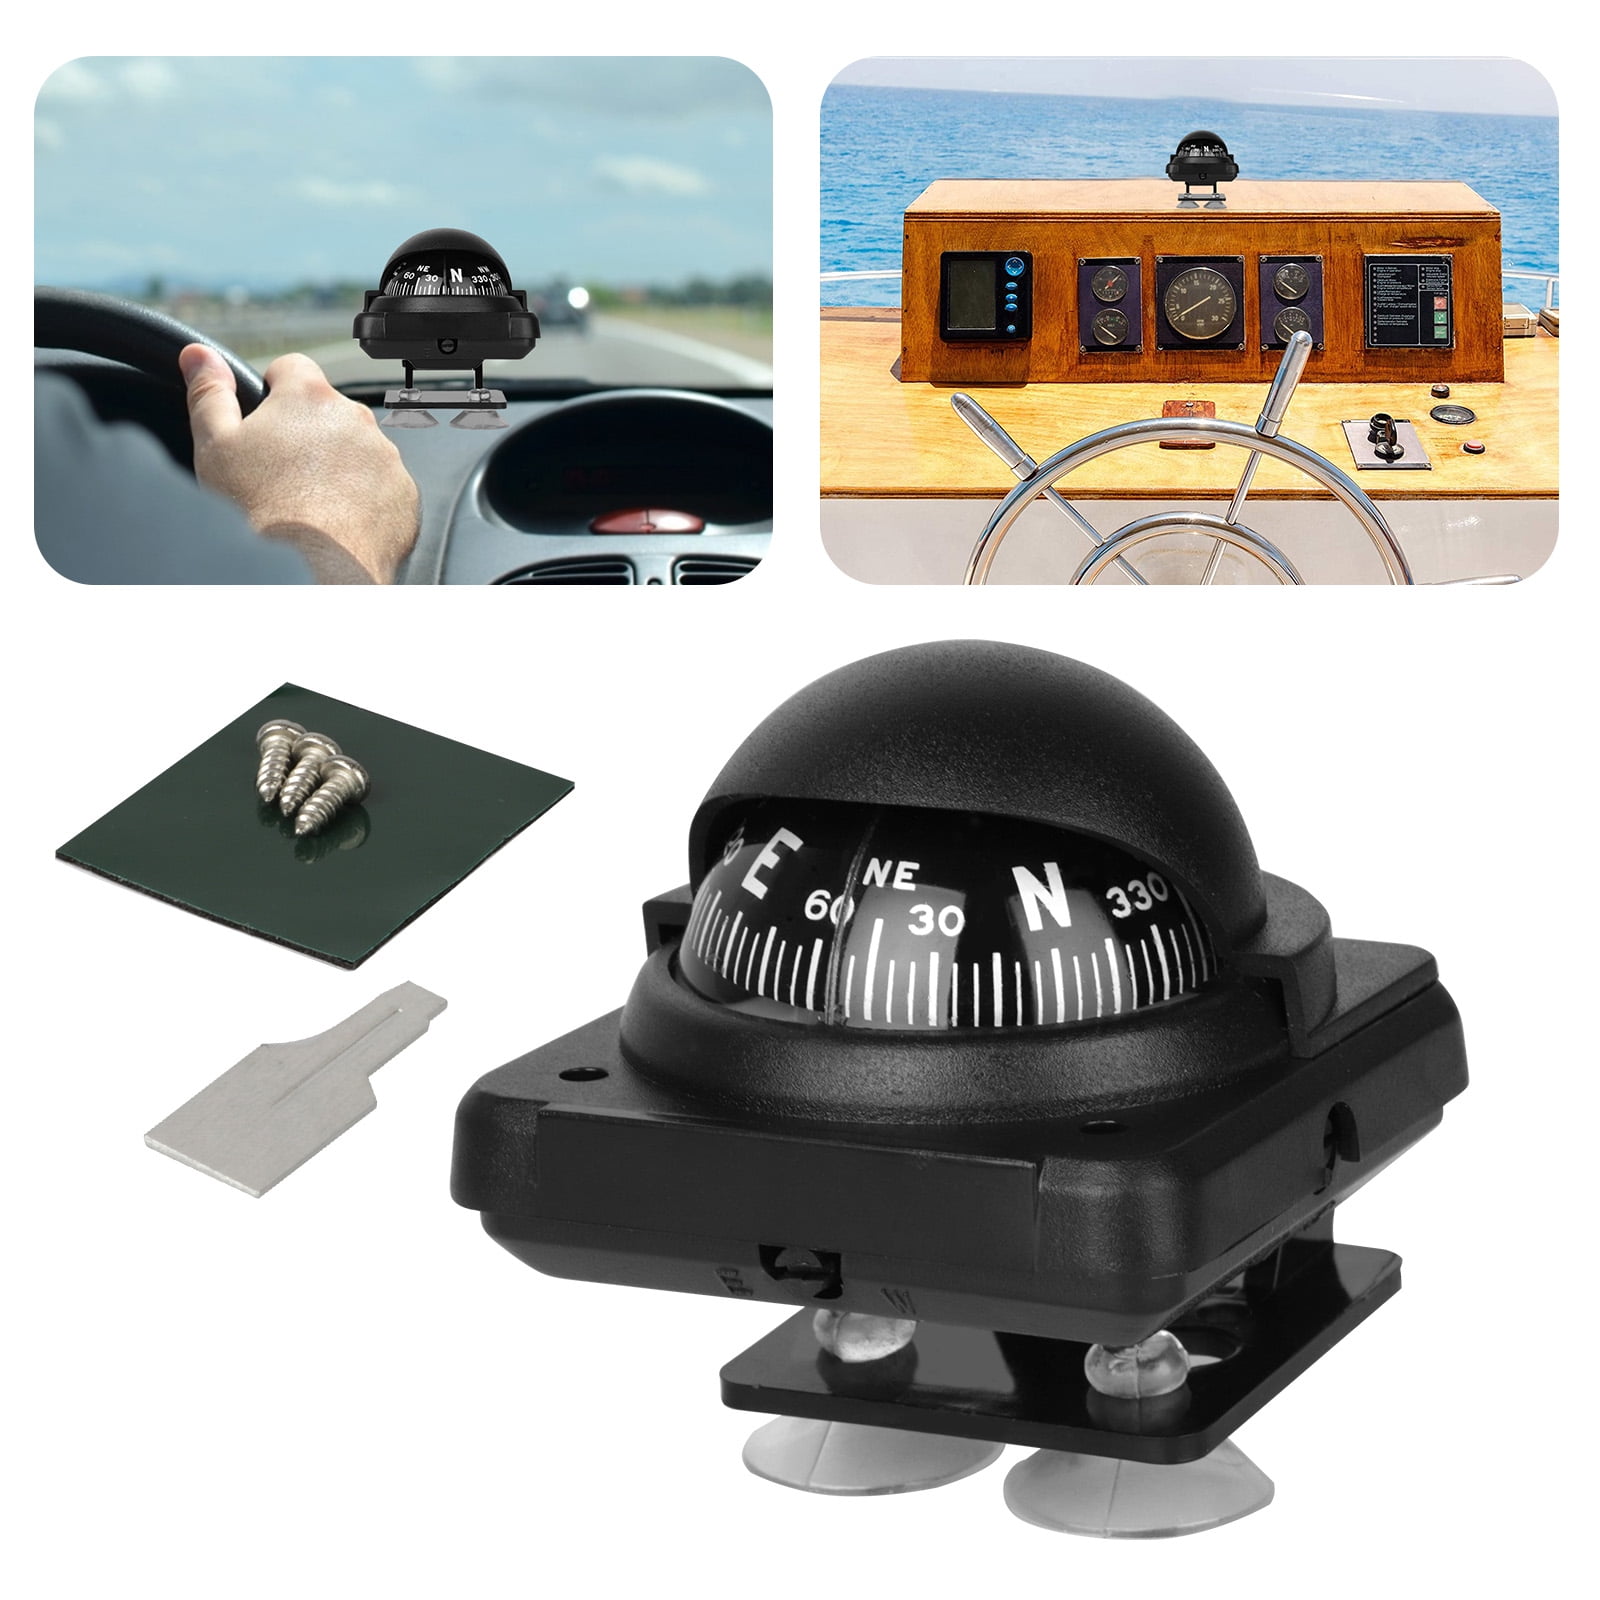 Car Auto Electronic Adjustable Dashboard Mount Compass Ball Kit For Boat Marine 